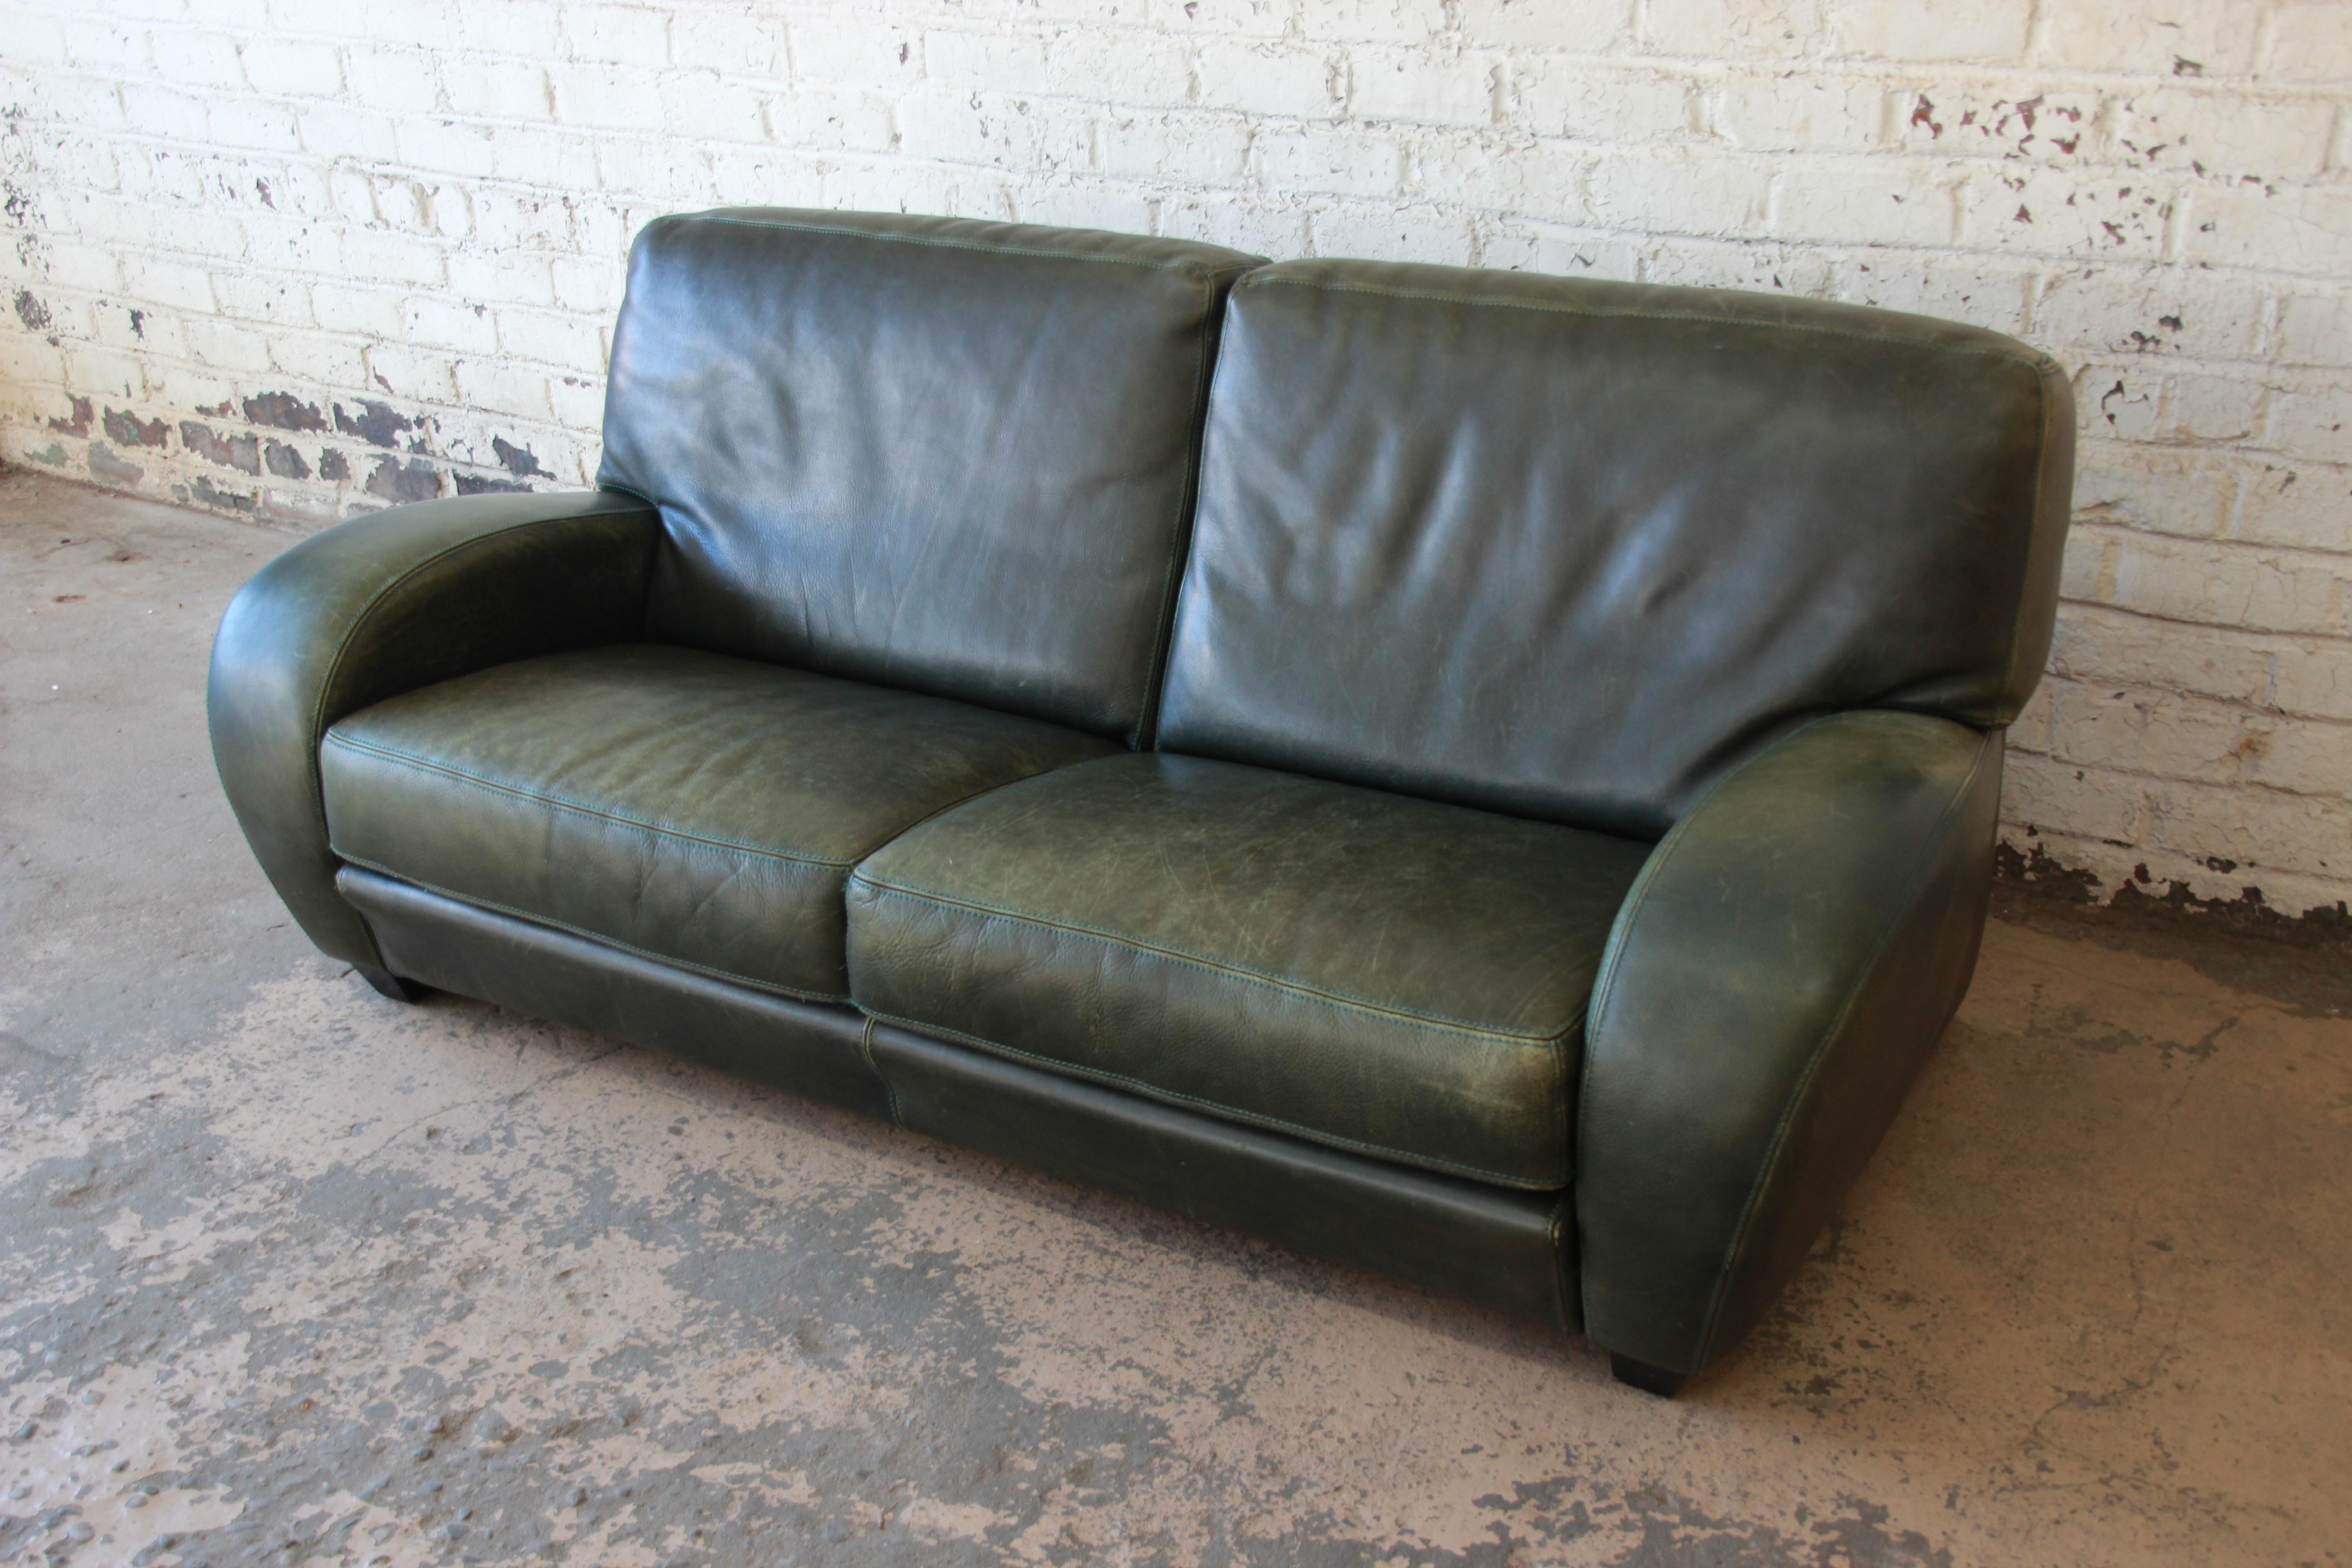 A gorgeous Art Deco style leather sofa by Roche Bobois. The sofa offers soft high-grade leather in army green. The leather is beautifully worn from age, with a nice patina. The sofa is extremely comfortable. It is in good vintage condition and ready